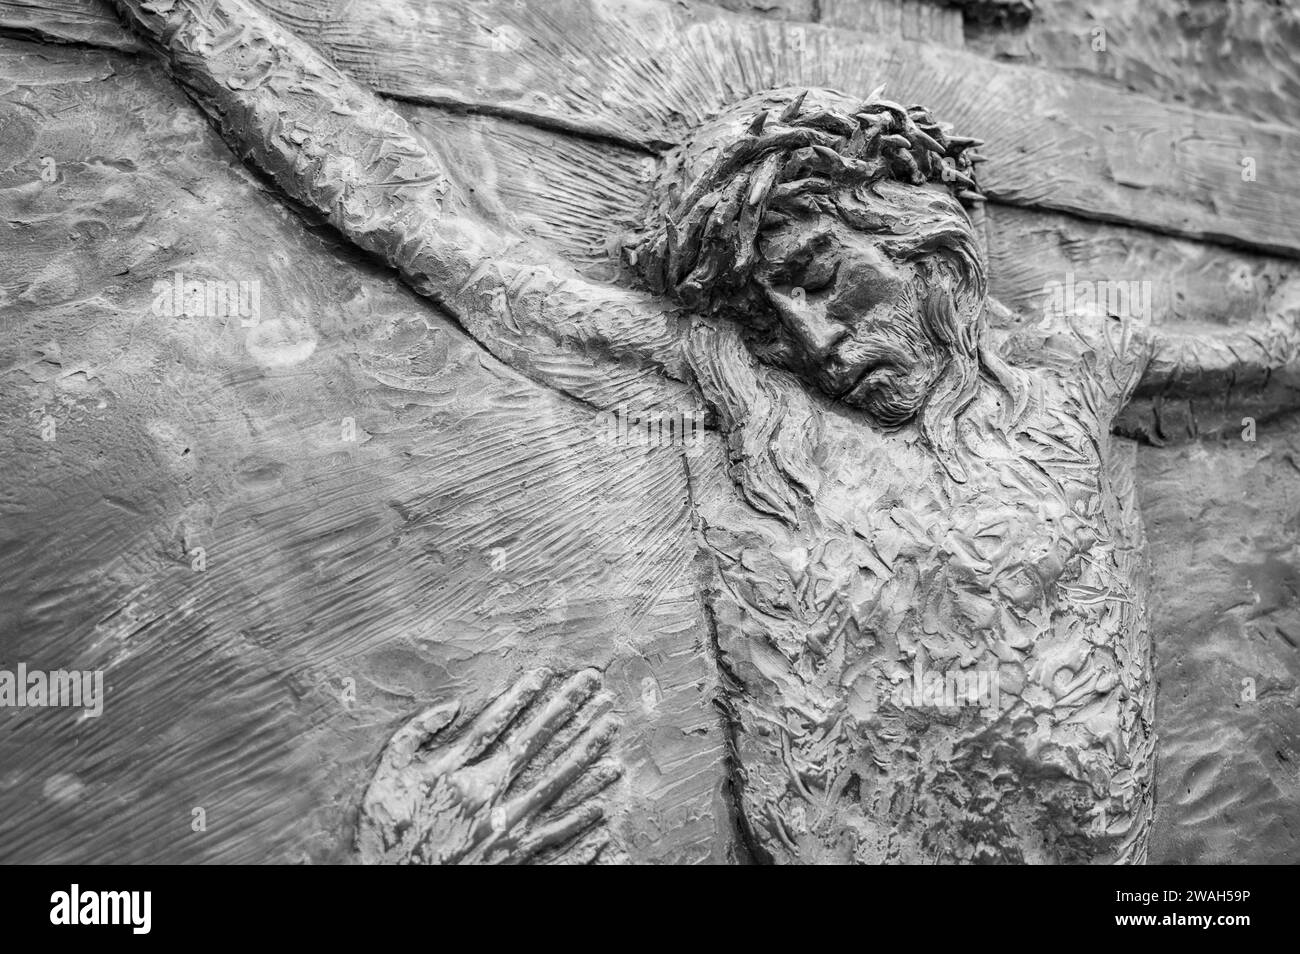 The Crucifixion of Jesus – Fifth Sorrowful Mystery of the Rosary. A relief sculpture on Mount Podbrdo (the Hill of Apparitions) in Medjugorje. Stock Photo